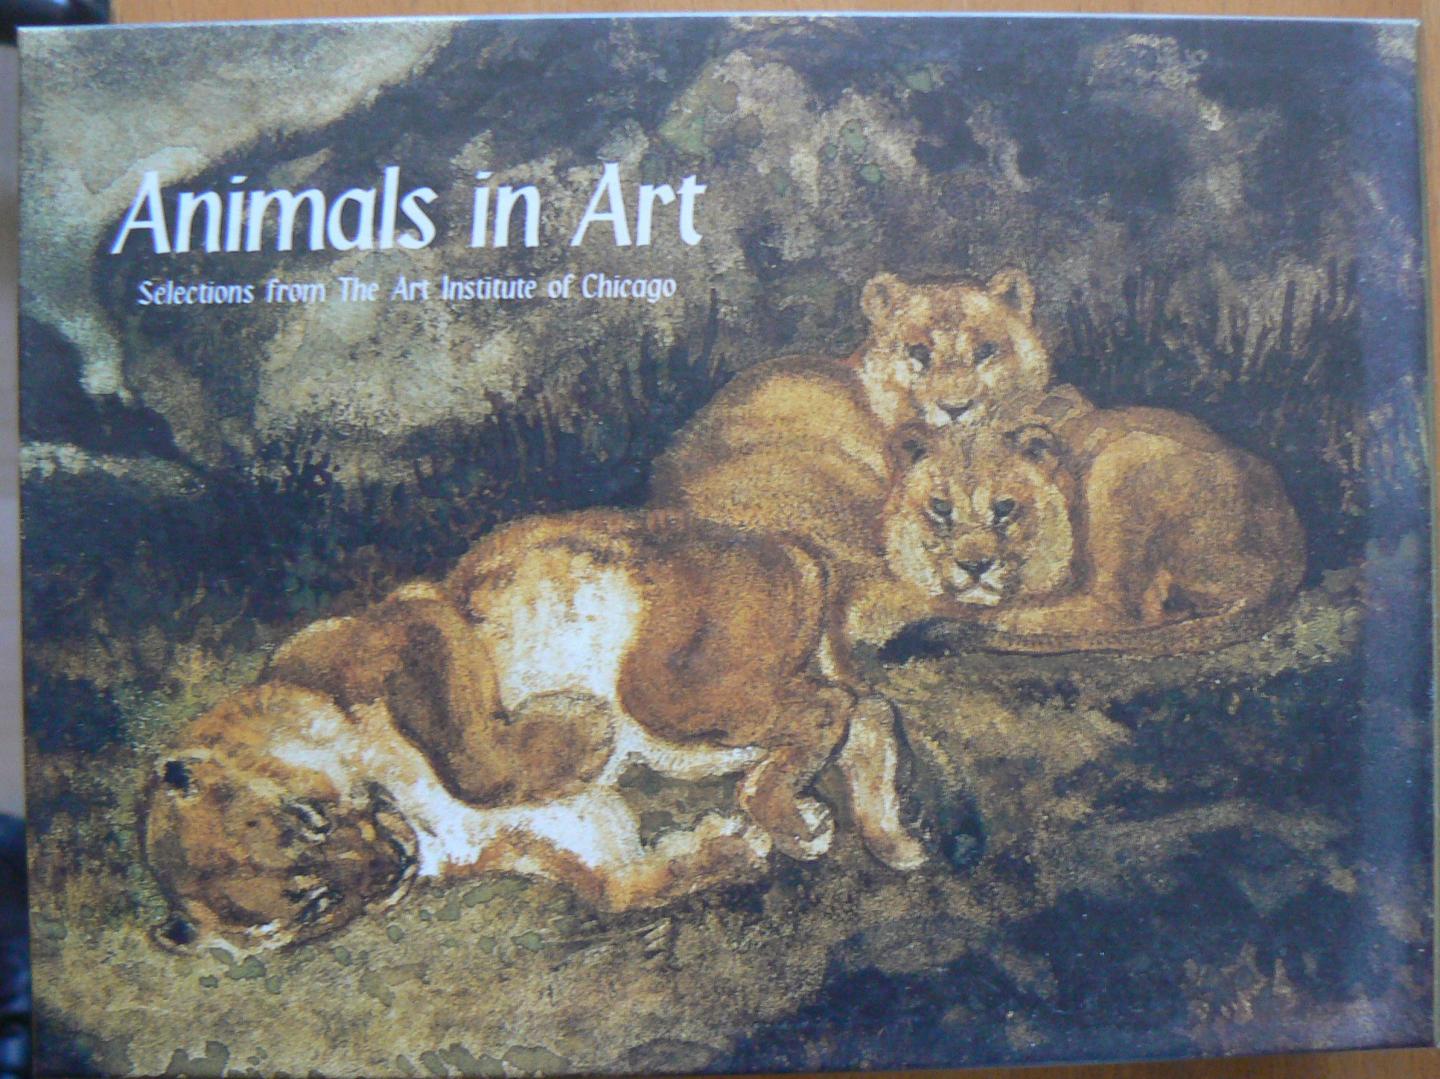  - Animals in Arts, 20 Note Cards with Envelopes, 4 each of 5 designs